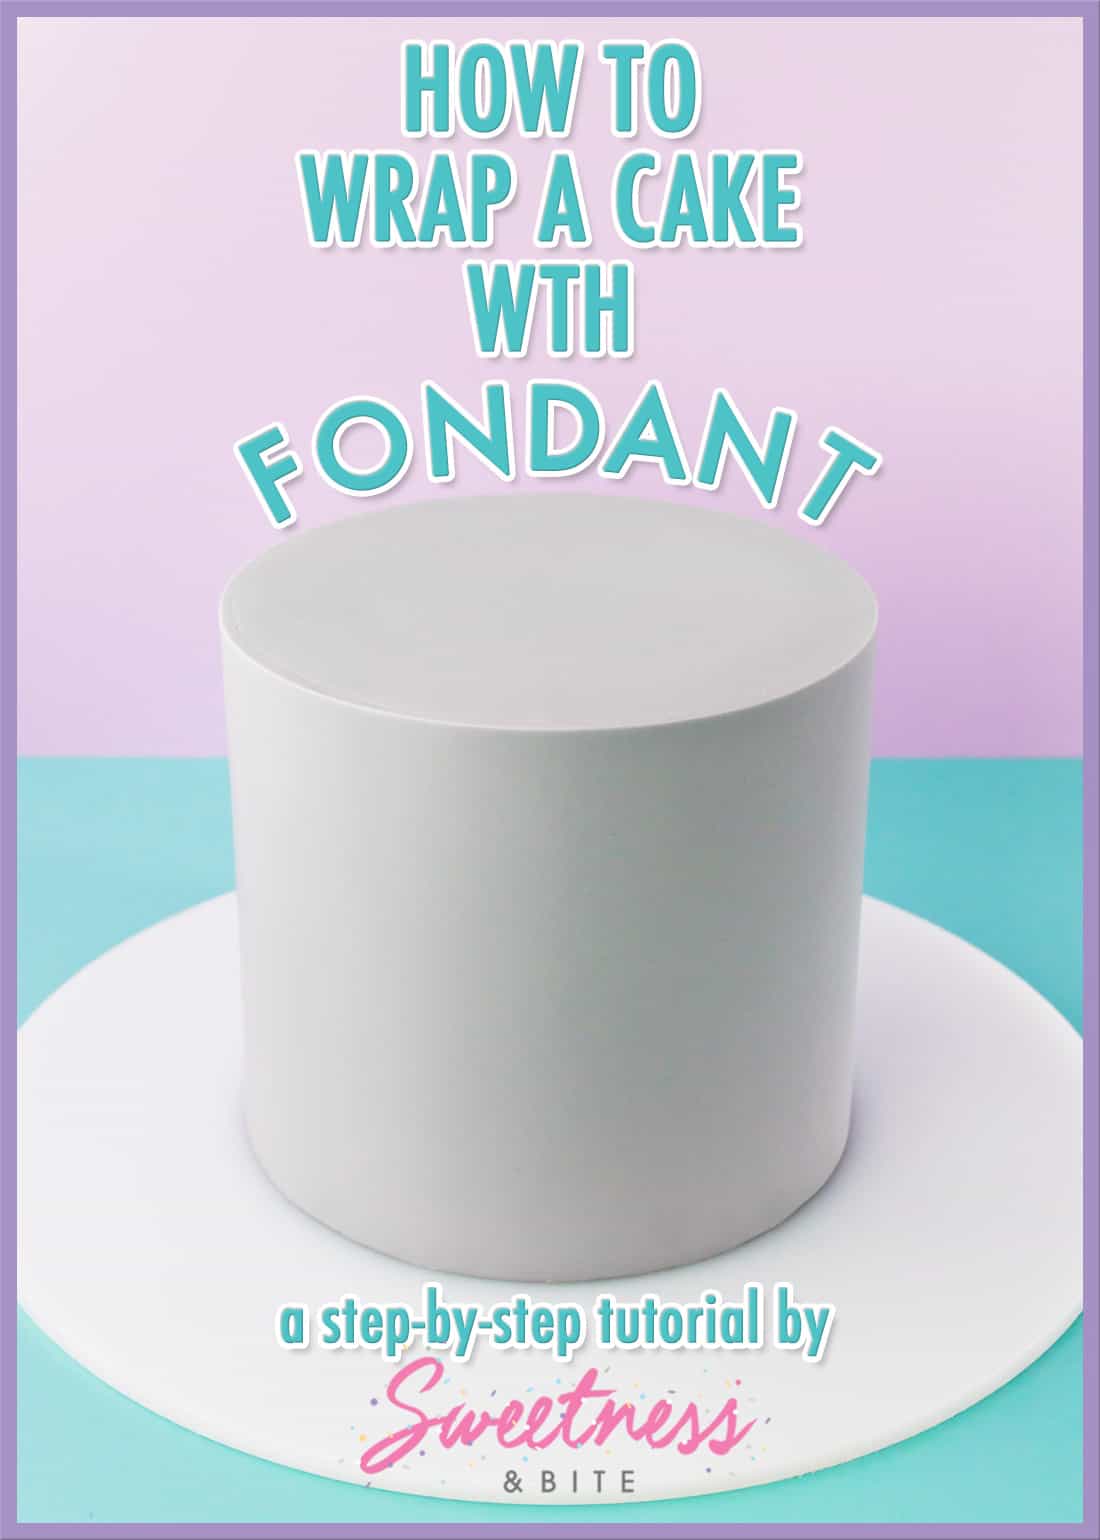 How To Wrap A Cake With Fondant - Sweetness & Bite